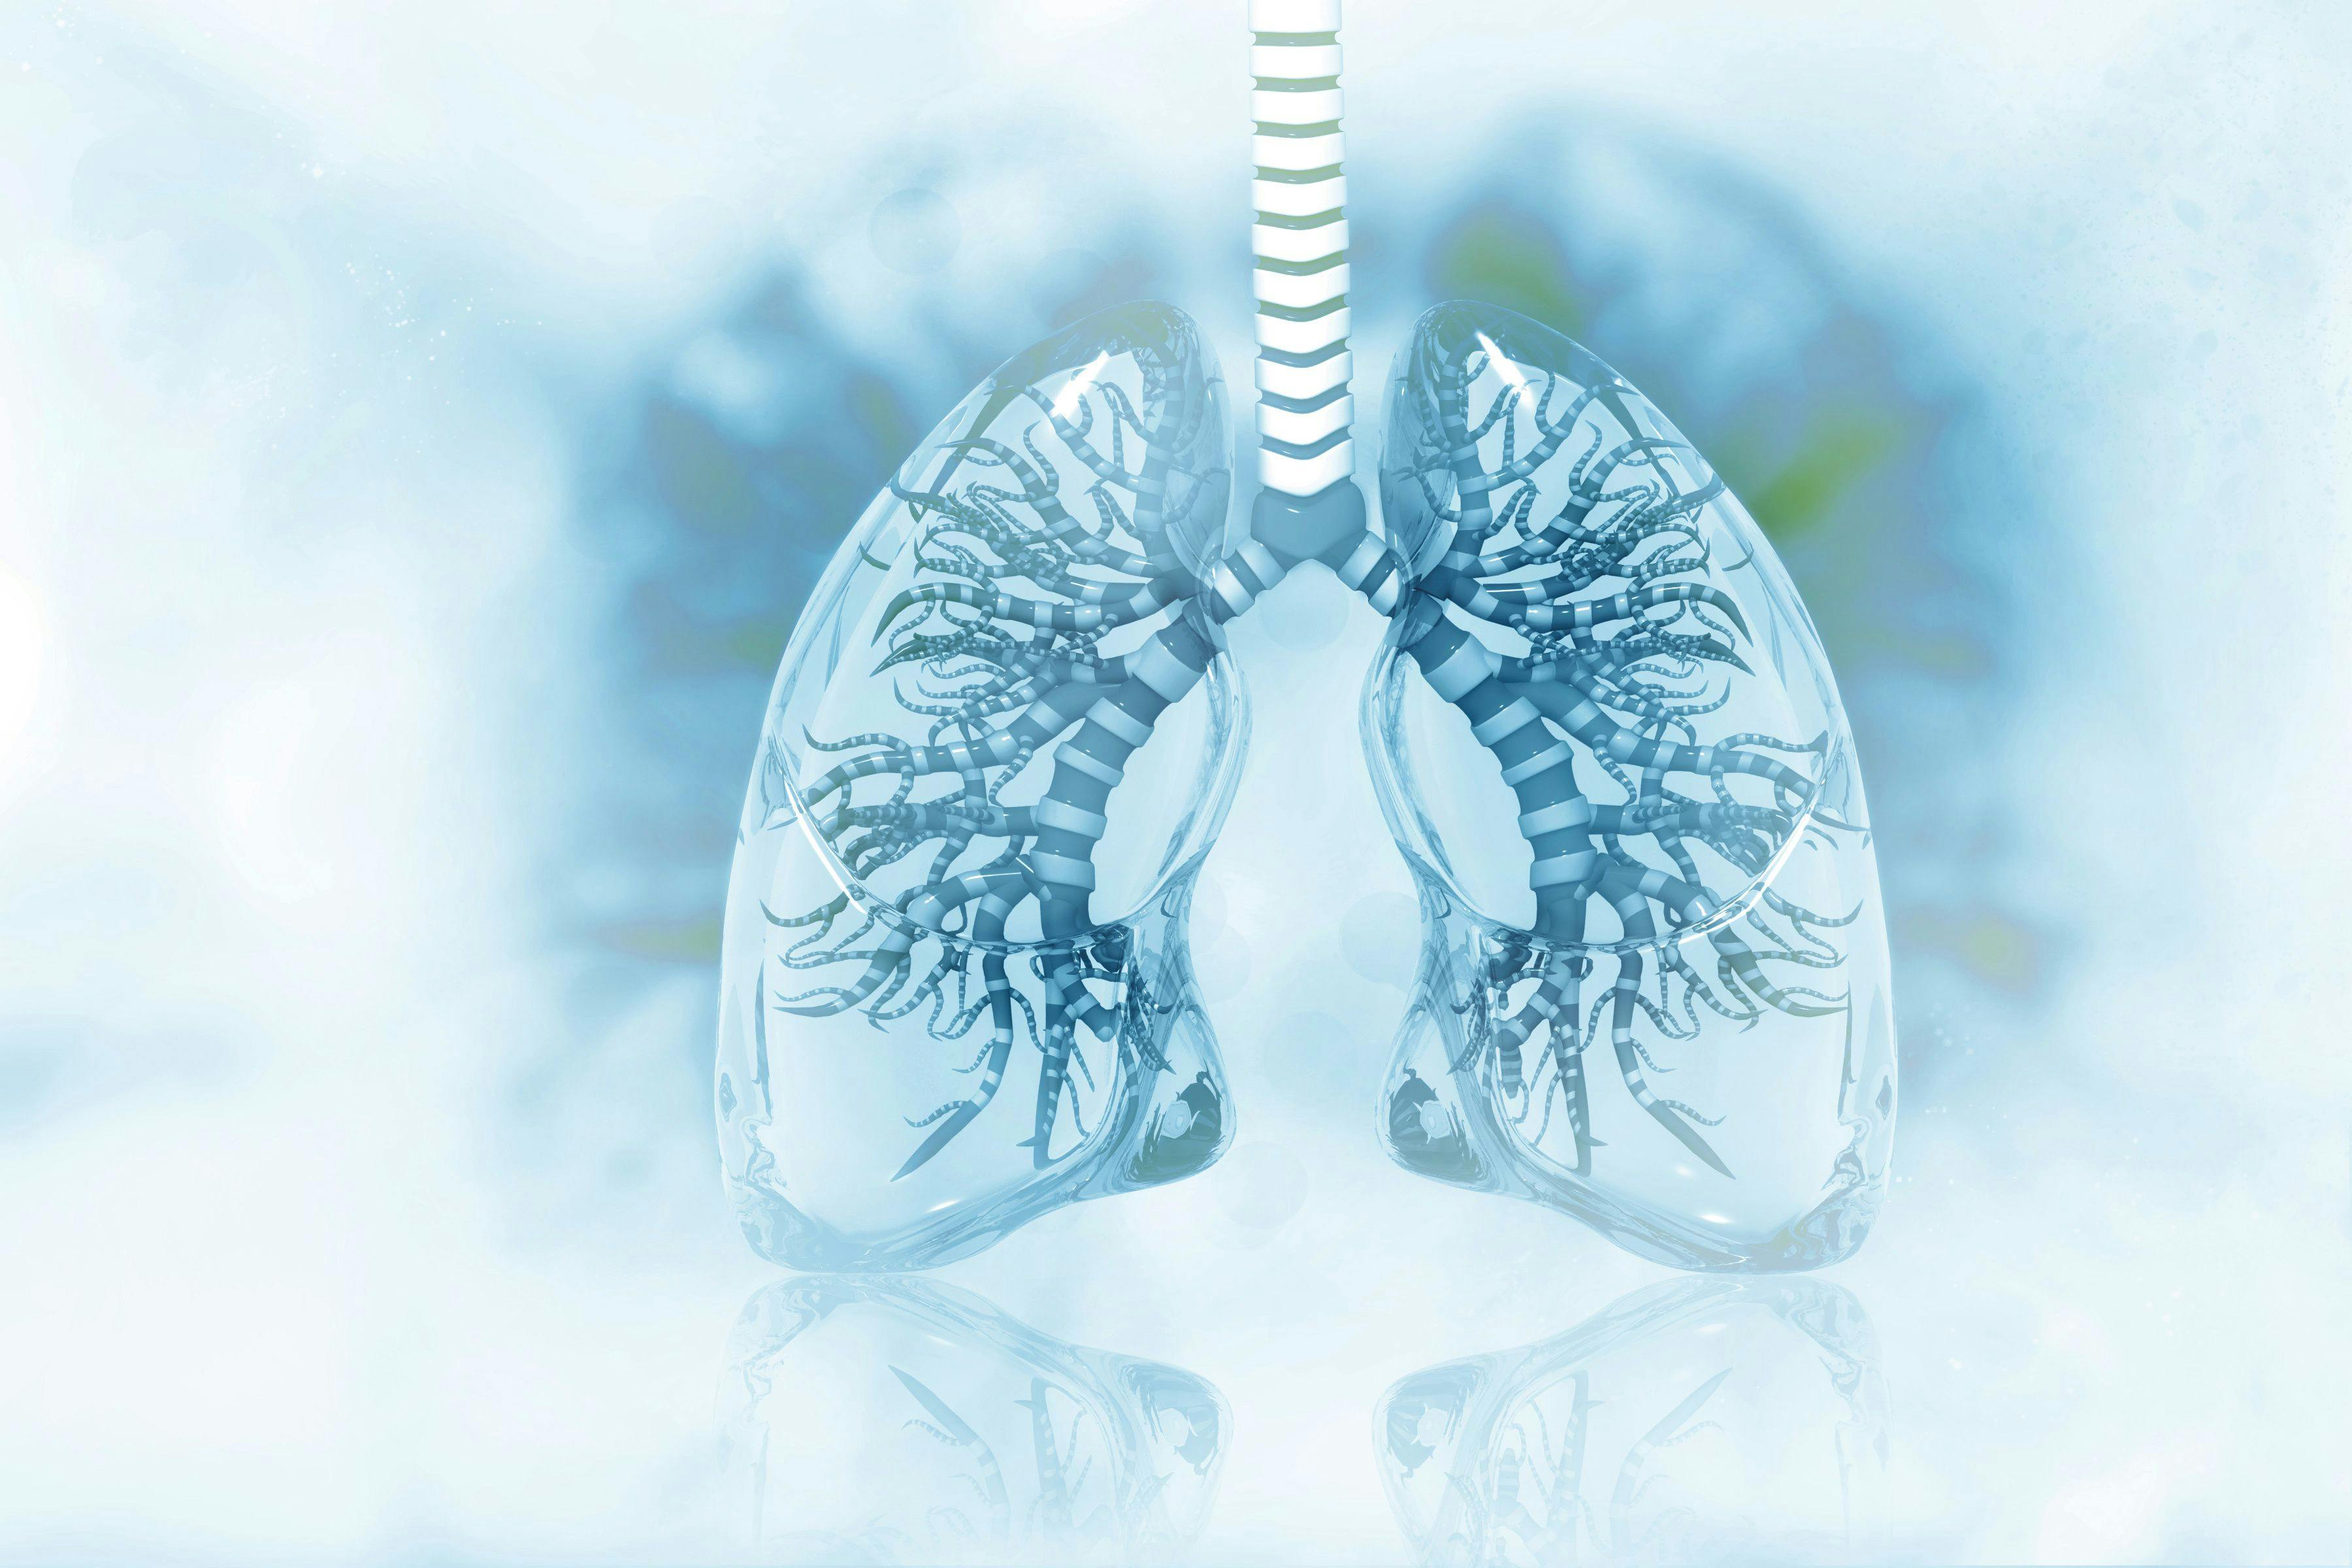 Human lungs on scientific background | Image Credit: Crystal light - stock.adobe.com